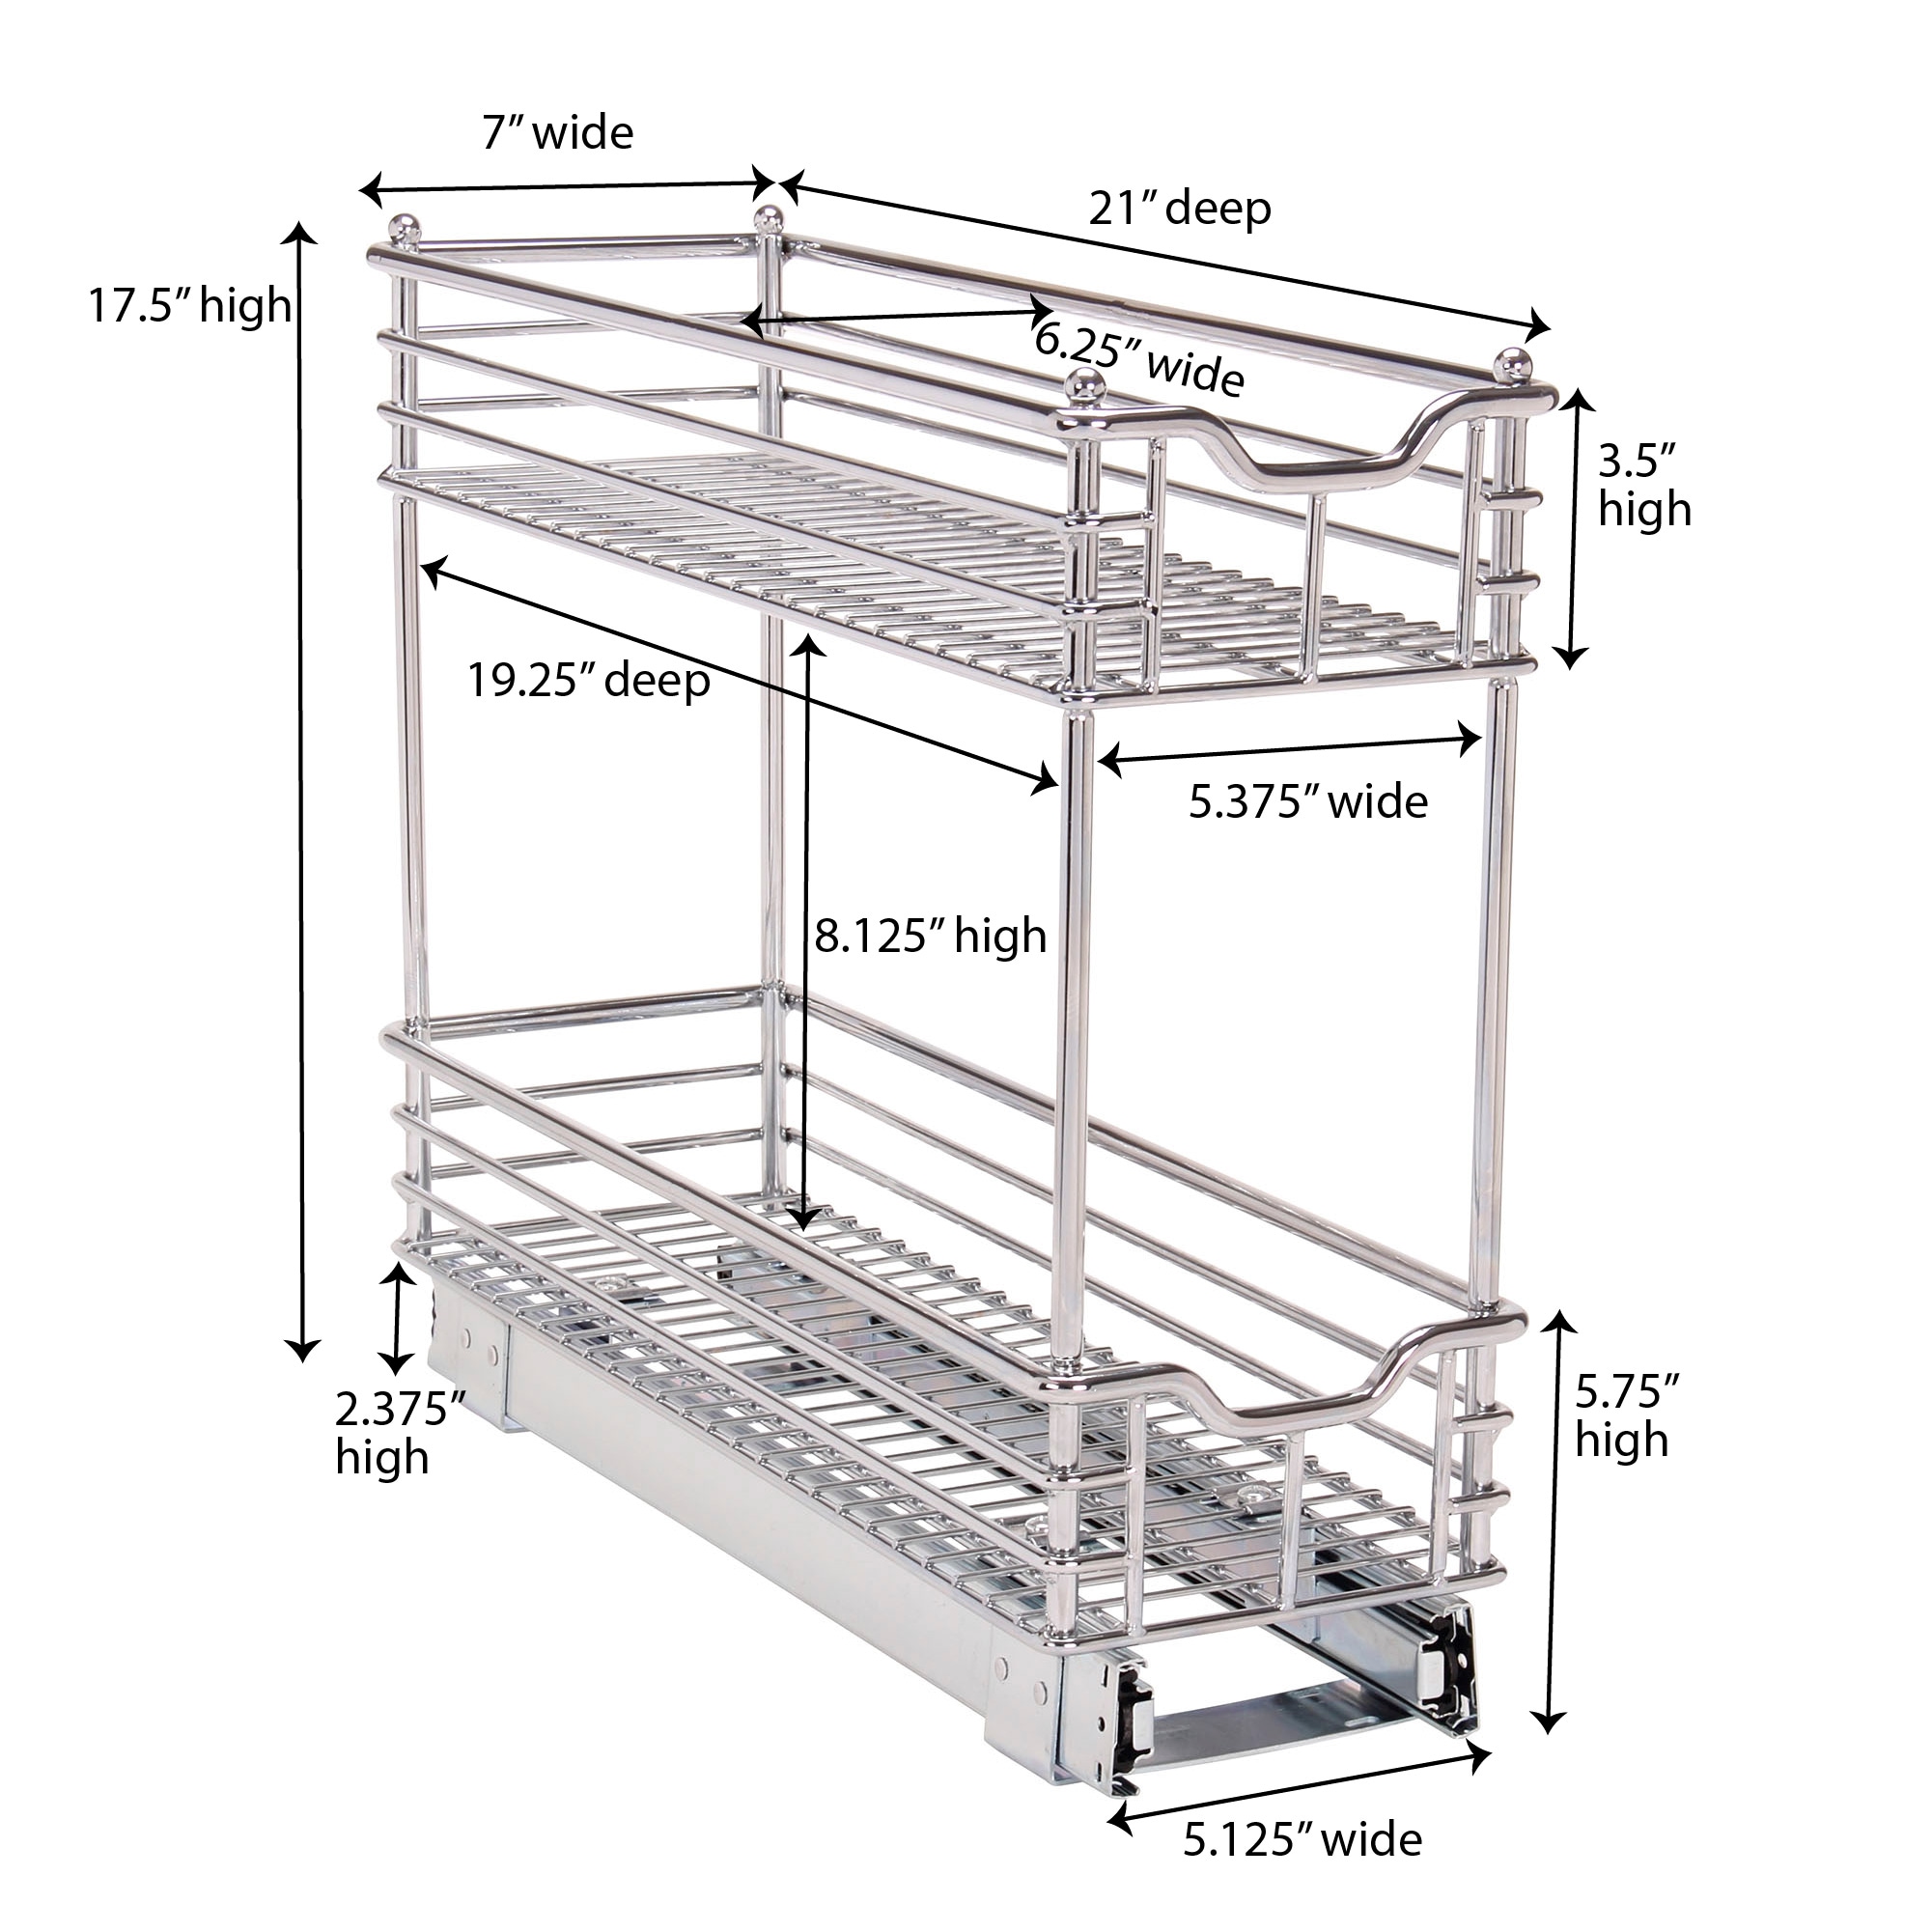 Pull out Cabinet Organizer, Expandable(11.7-19.7) Heavy Duty